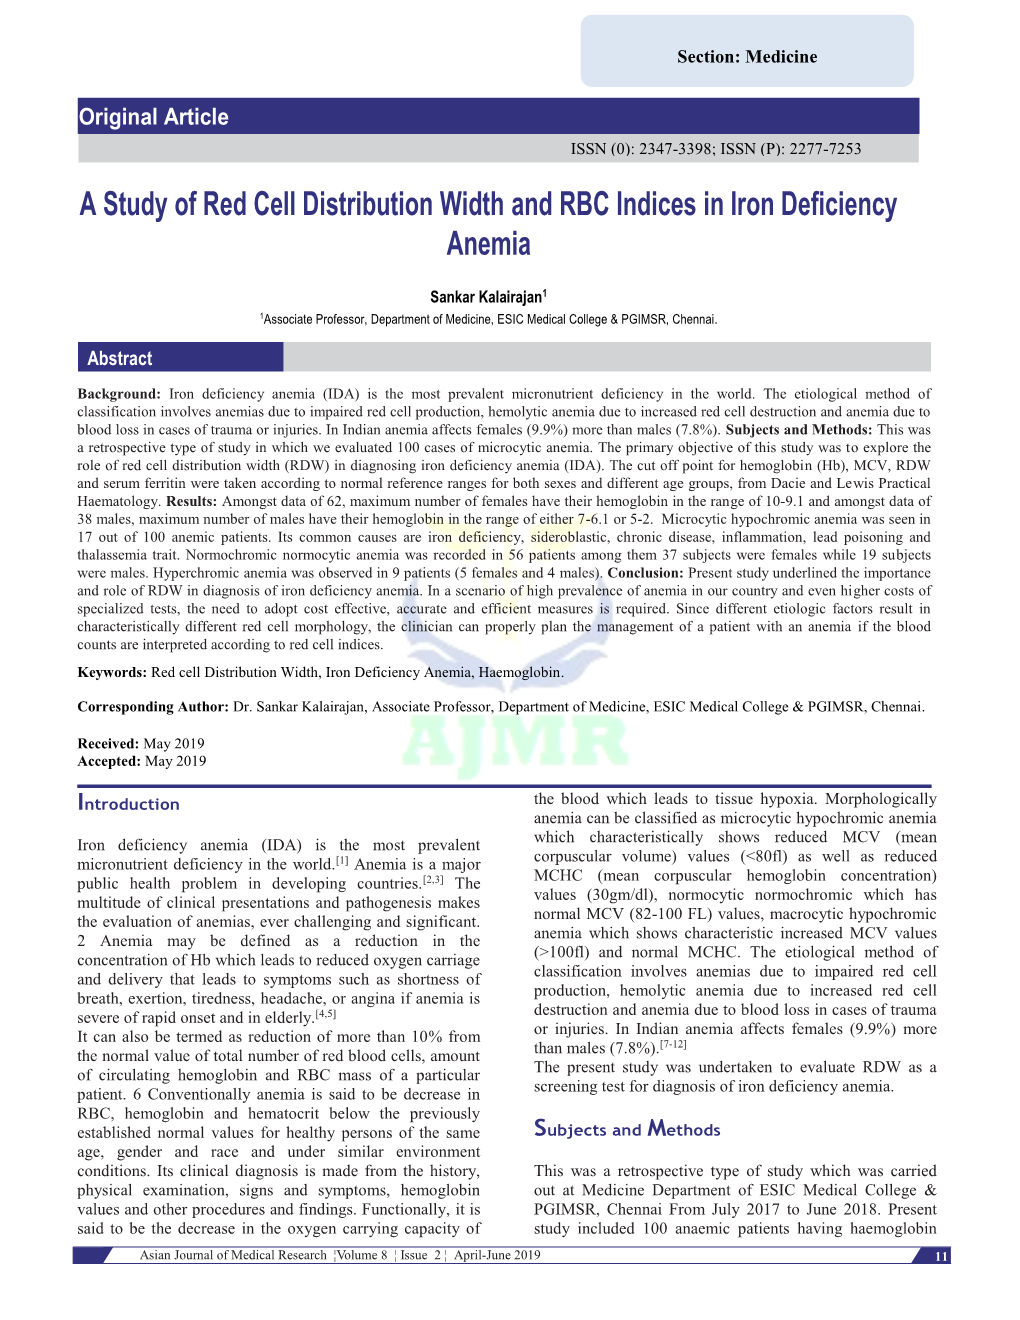 A Study of Red Cell Distribution Width and RBC Indices in Iron Deficiency Anemia